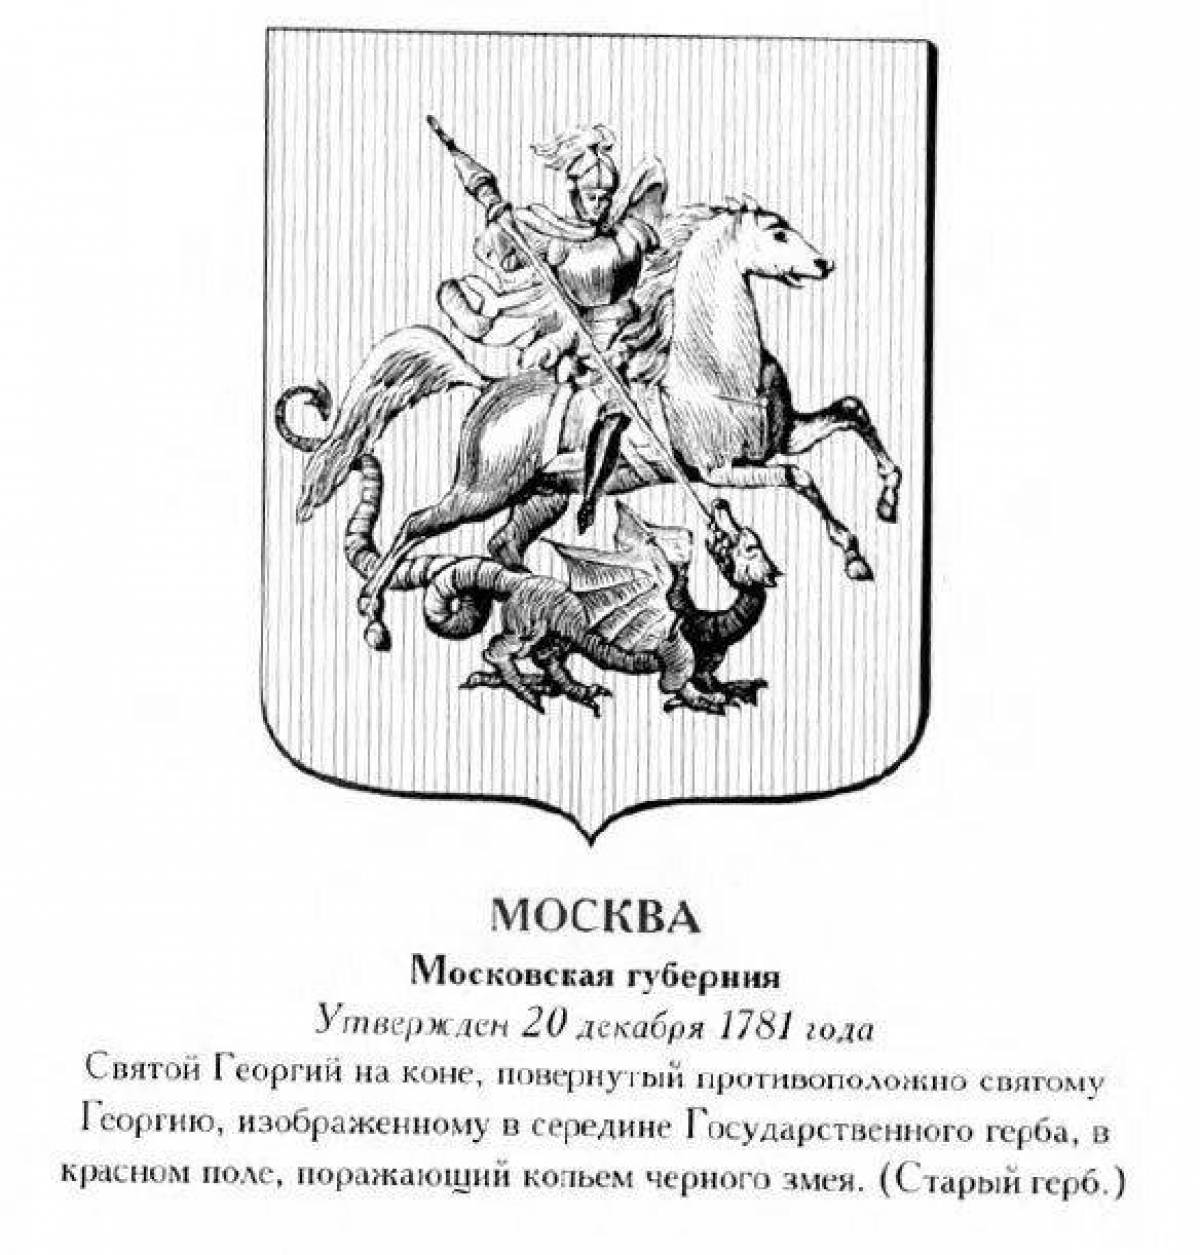 Ornate coloring coat of arms of moscow